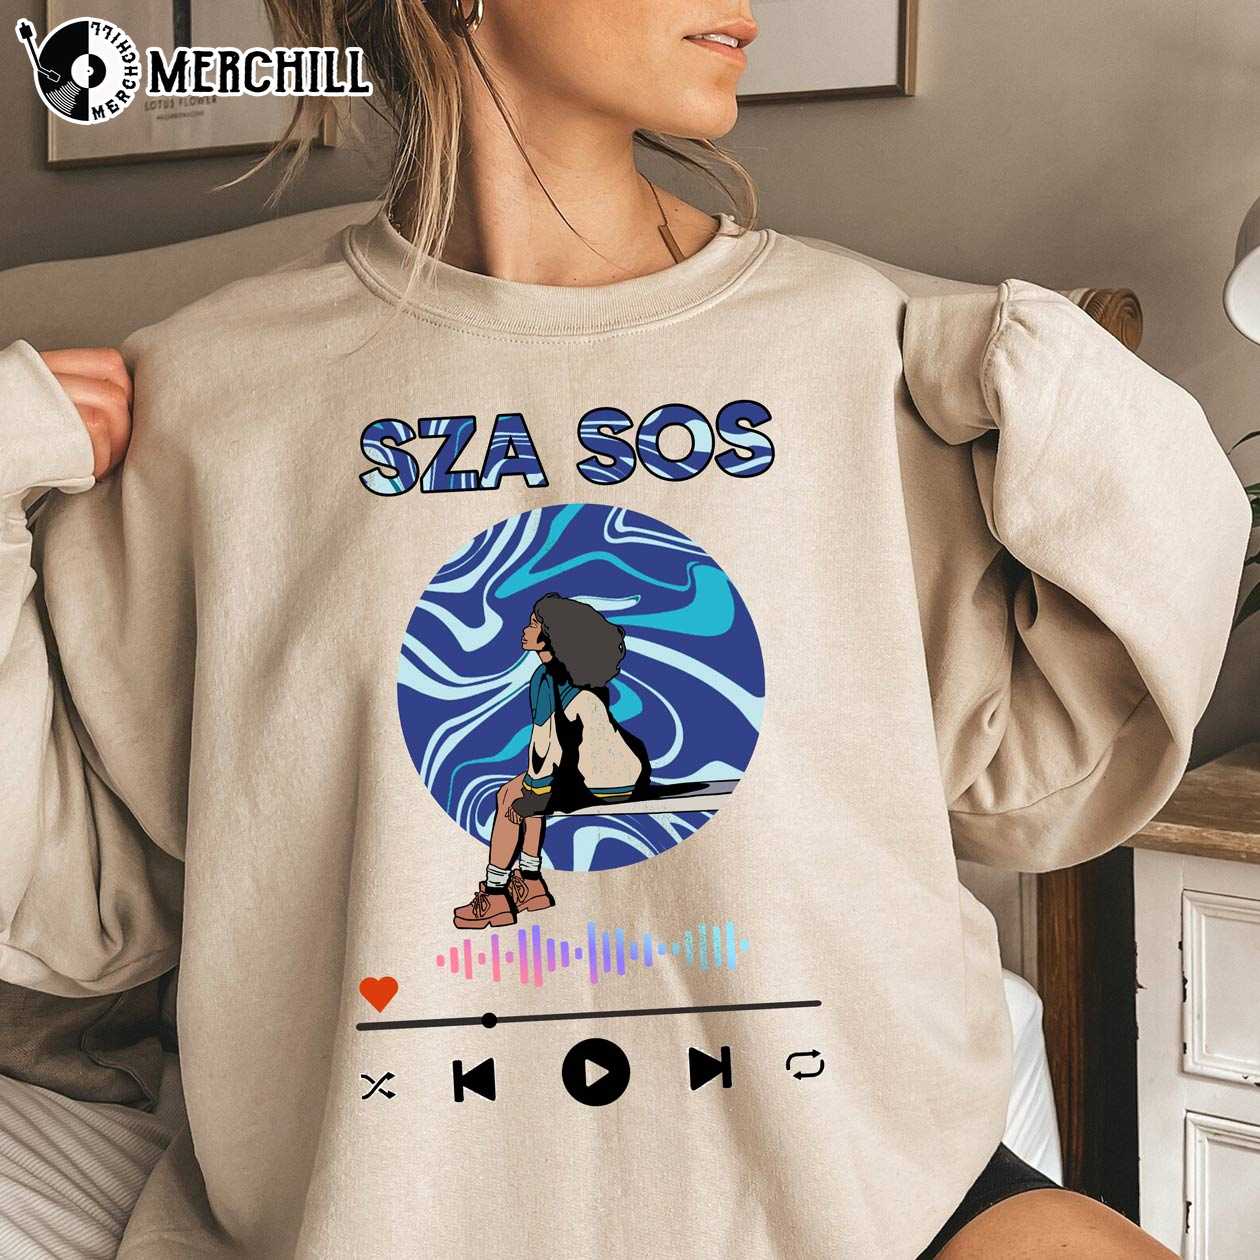 SOS merch out now! : r/sza